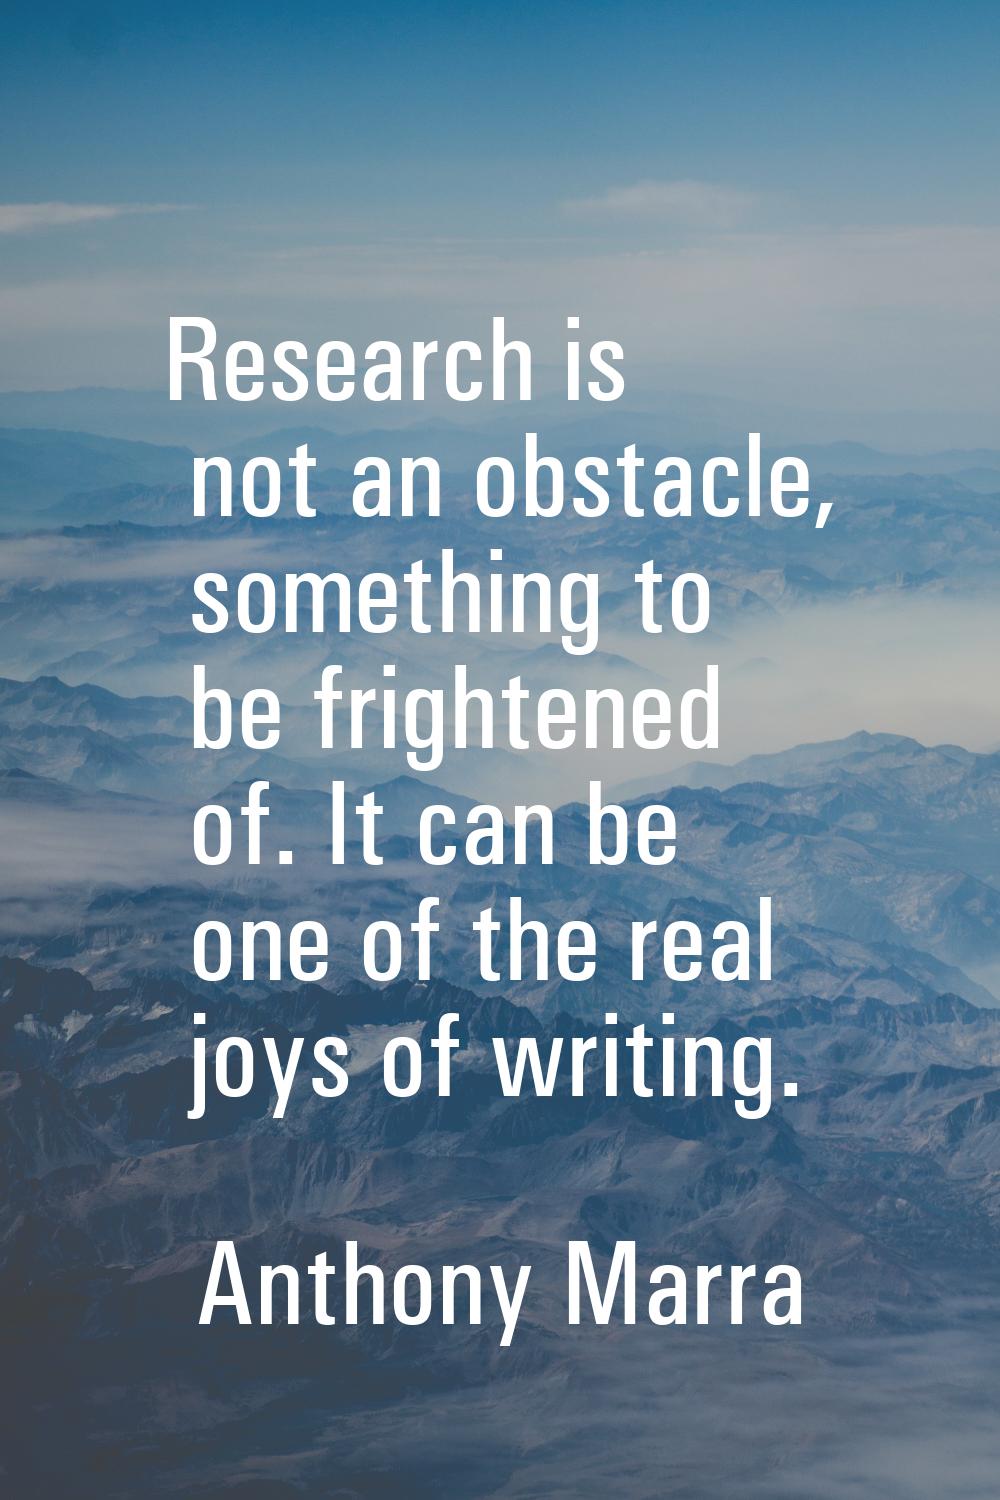 Research is not an obstacle, something to be frightened of. It can be one of the real joys of writi